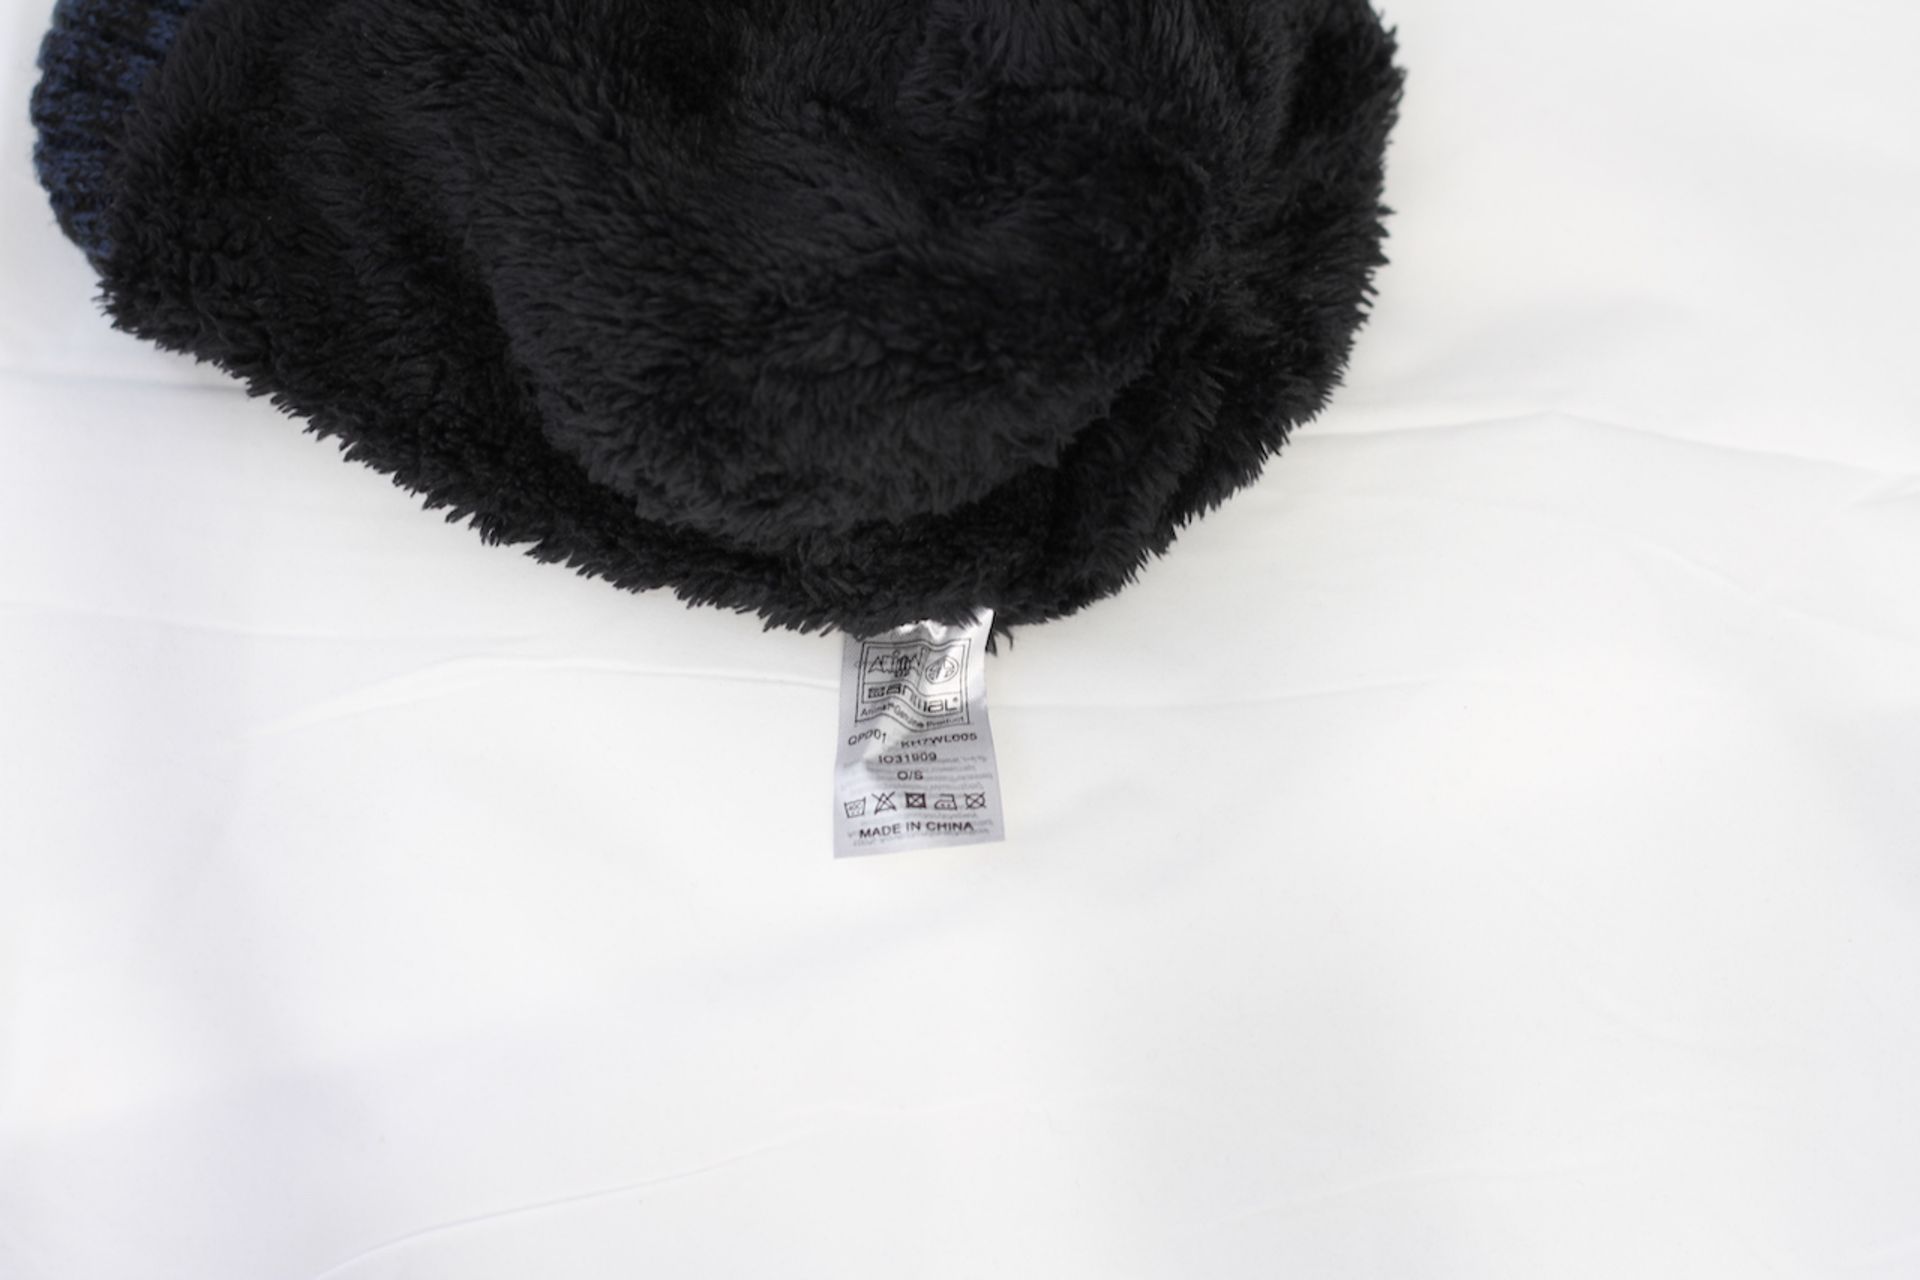 ANIMAL BEANIE HAT FUR LINED, Colour : BLUE, AGE: UNKNOWN, SIZE: ONE SIZE, CONDITION GRADE: 1 VERY - Image 2 of 2